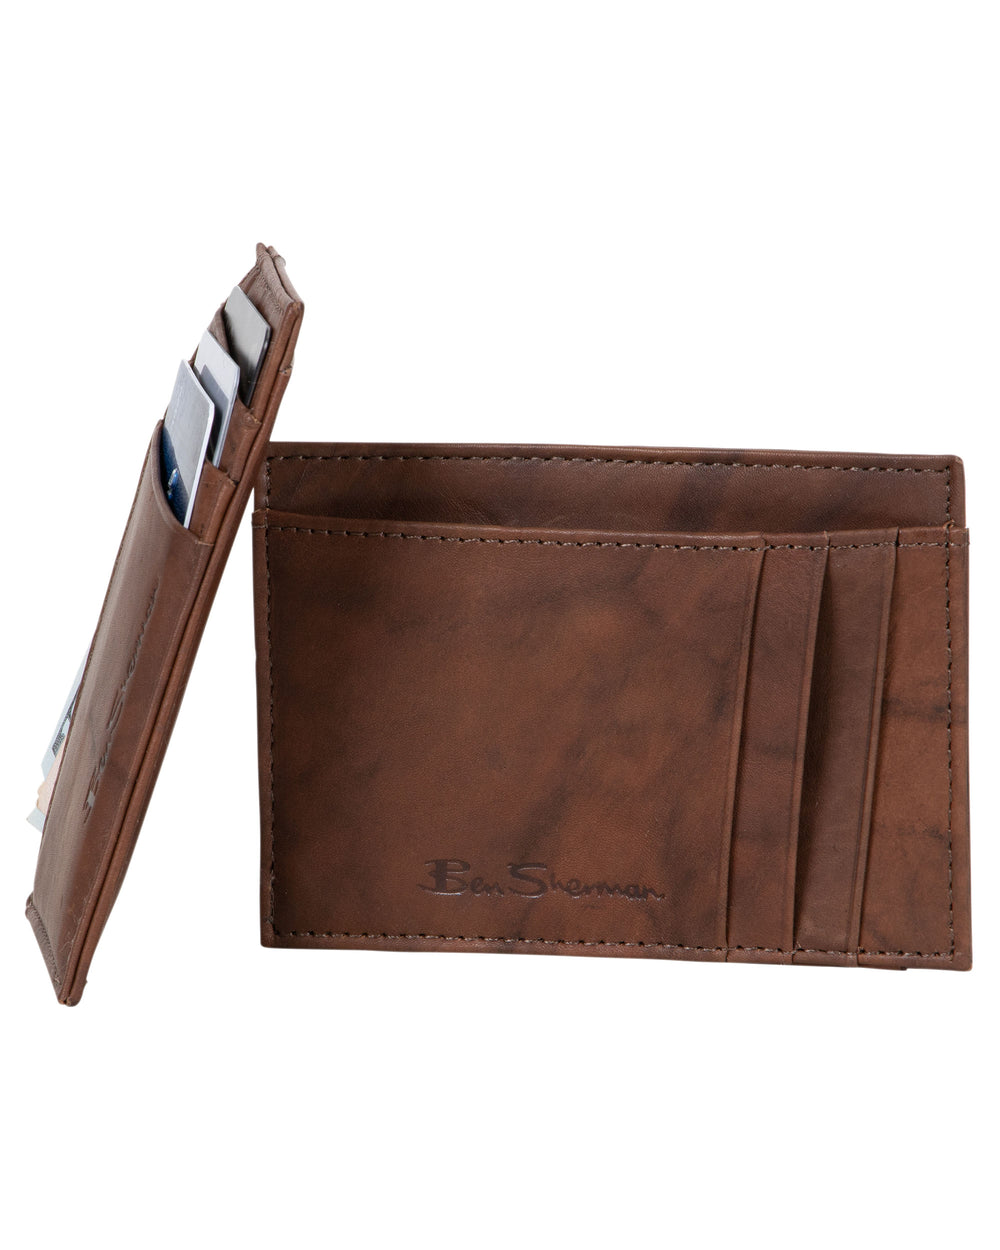 Manchester Marble Crunch Leather Slim Card Case - Brown